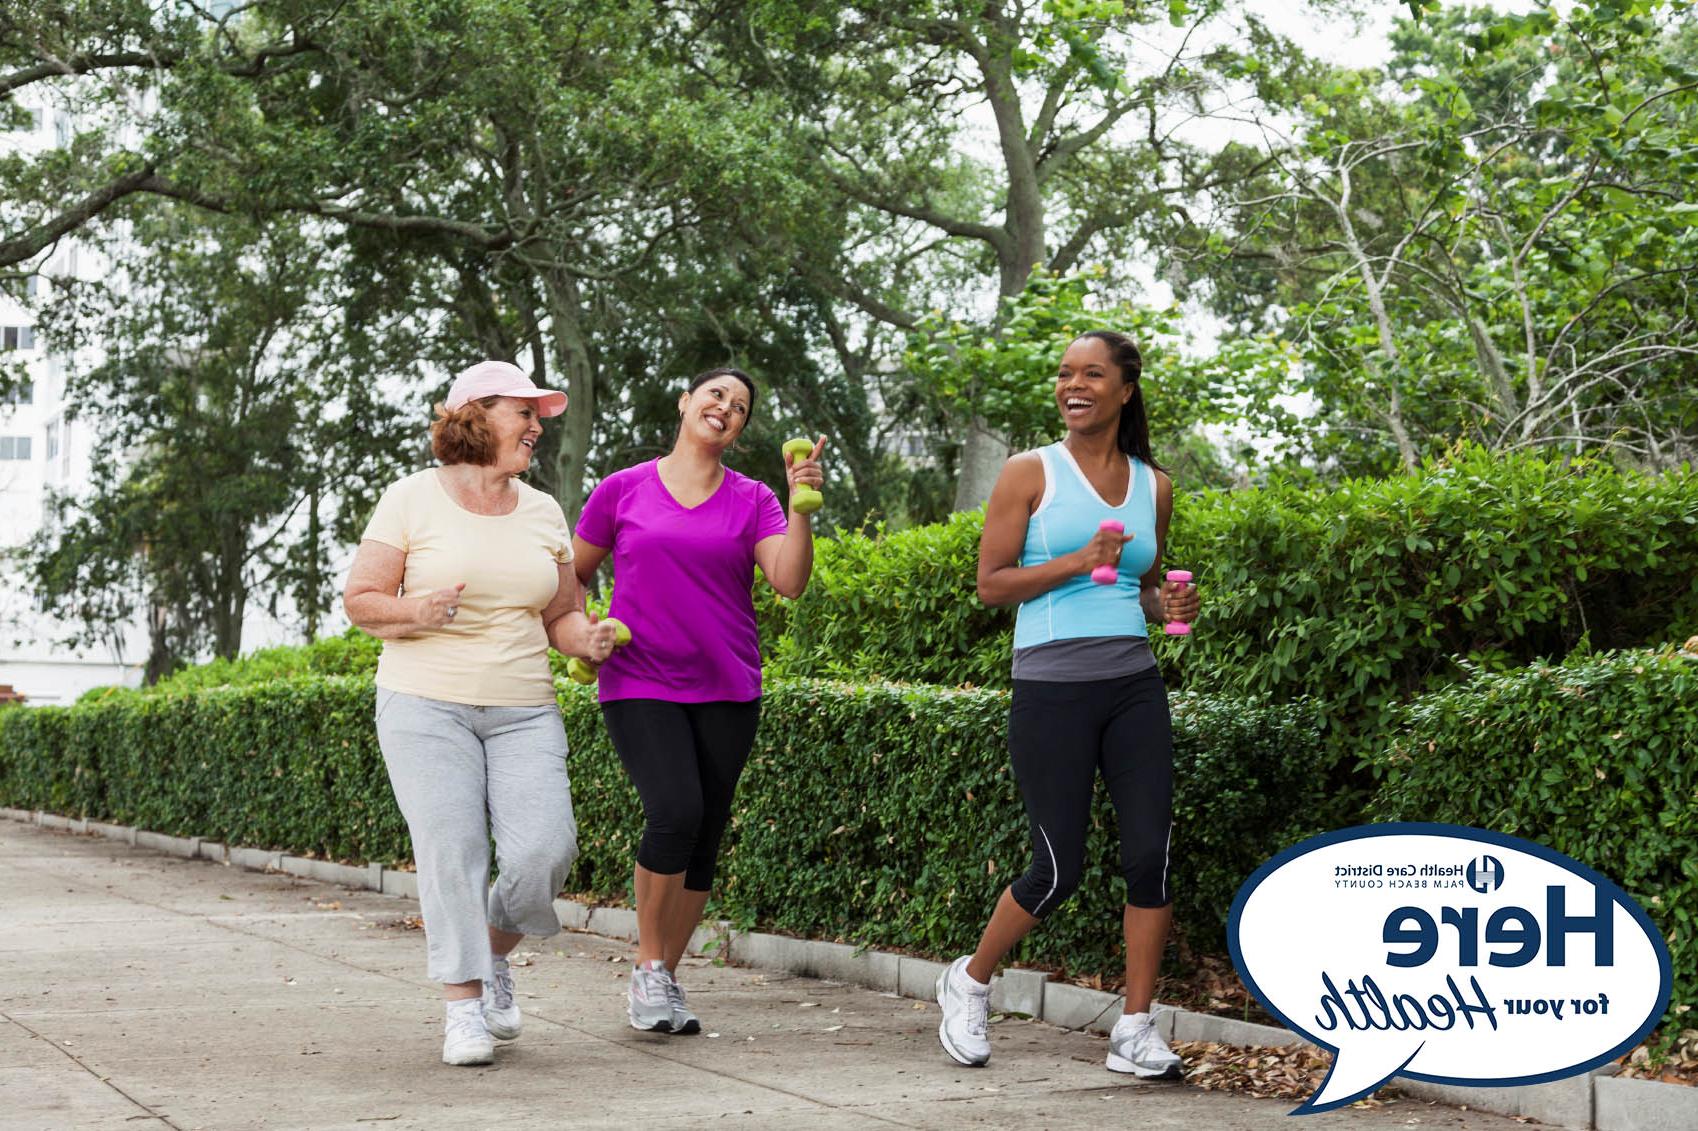 Three women having a happy conversation while jogging with dumbbells